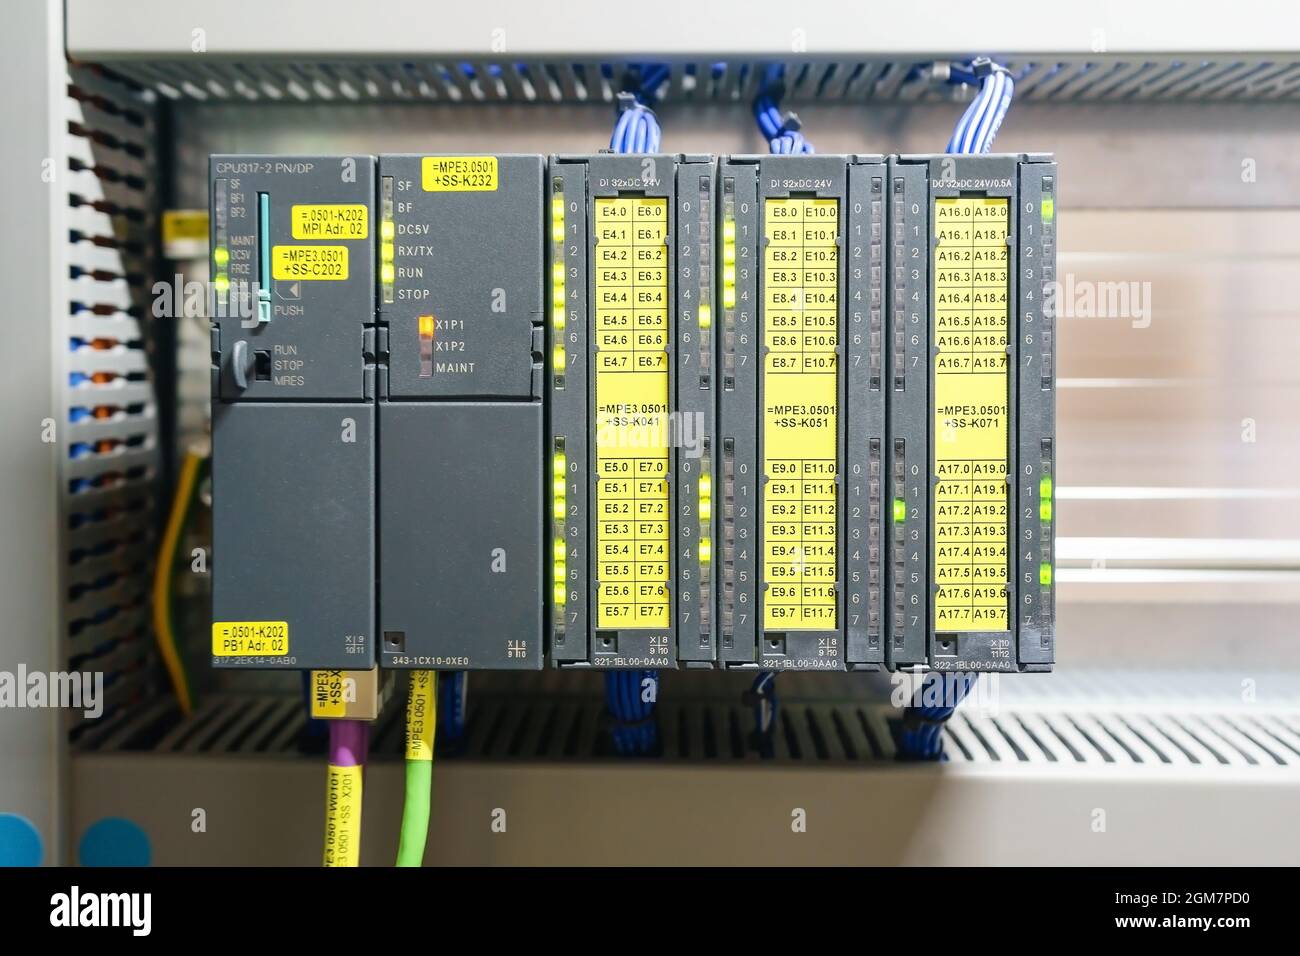 Programmable Logic Controller( PLC ) comprised of analog digital input and output card with power supply and processor module, this being used in oil Stock Photo